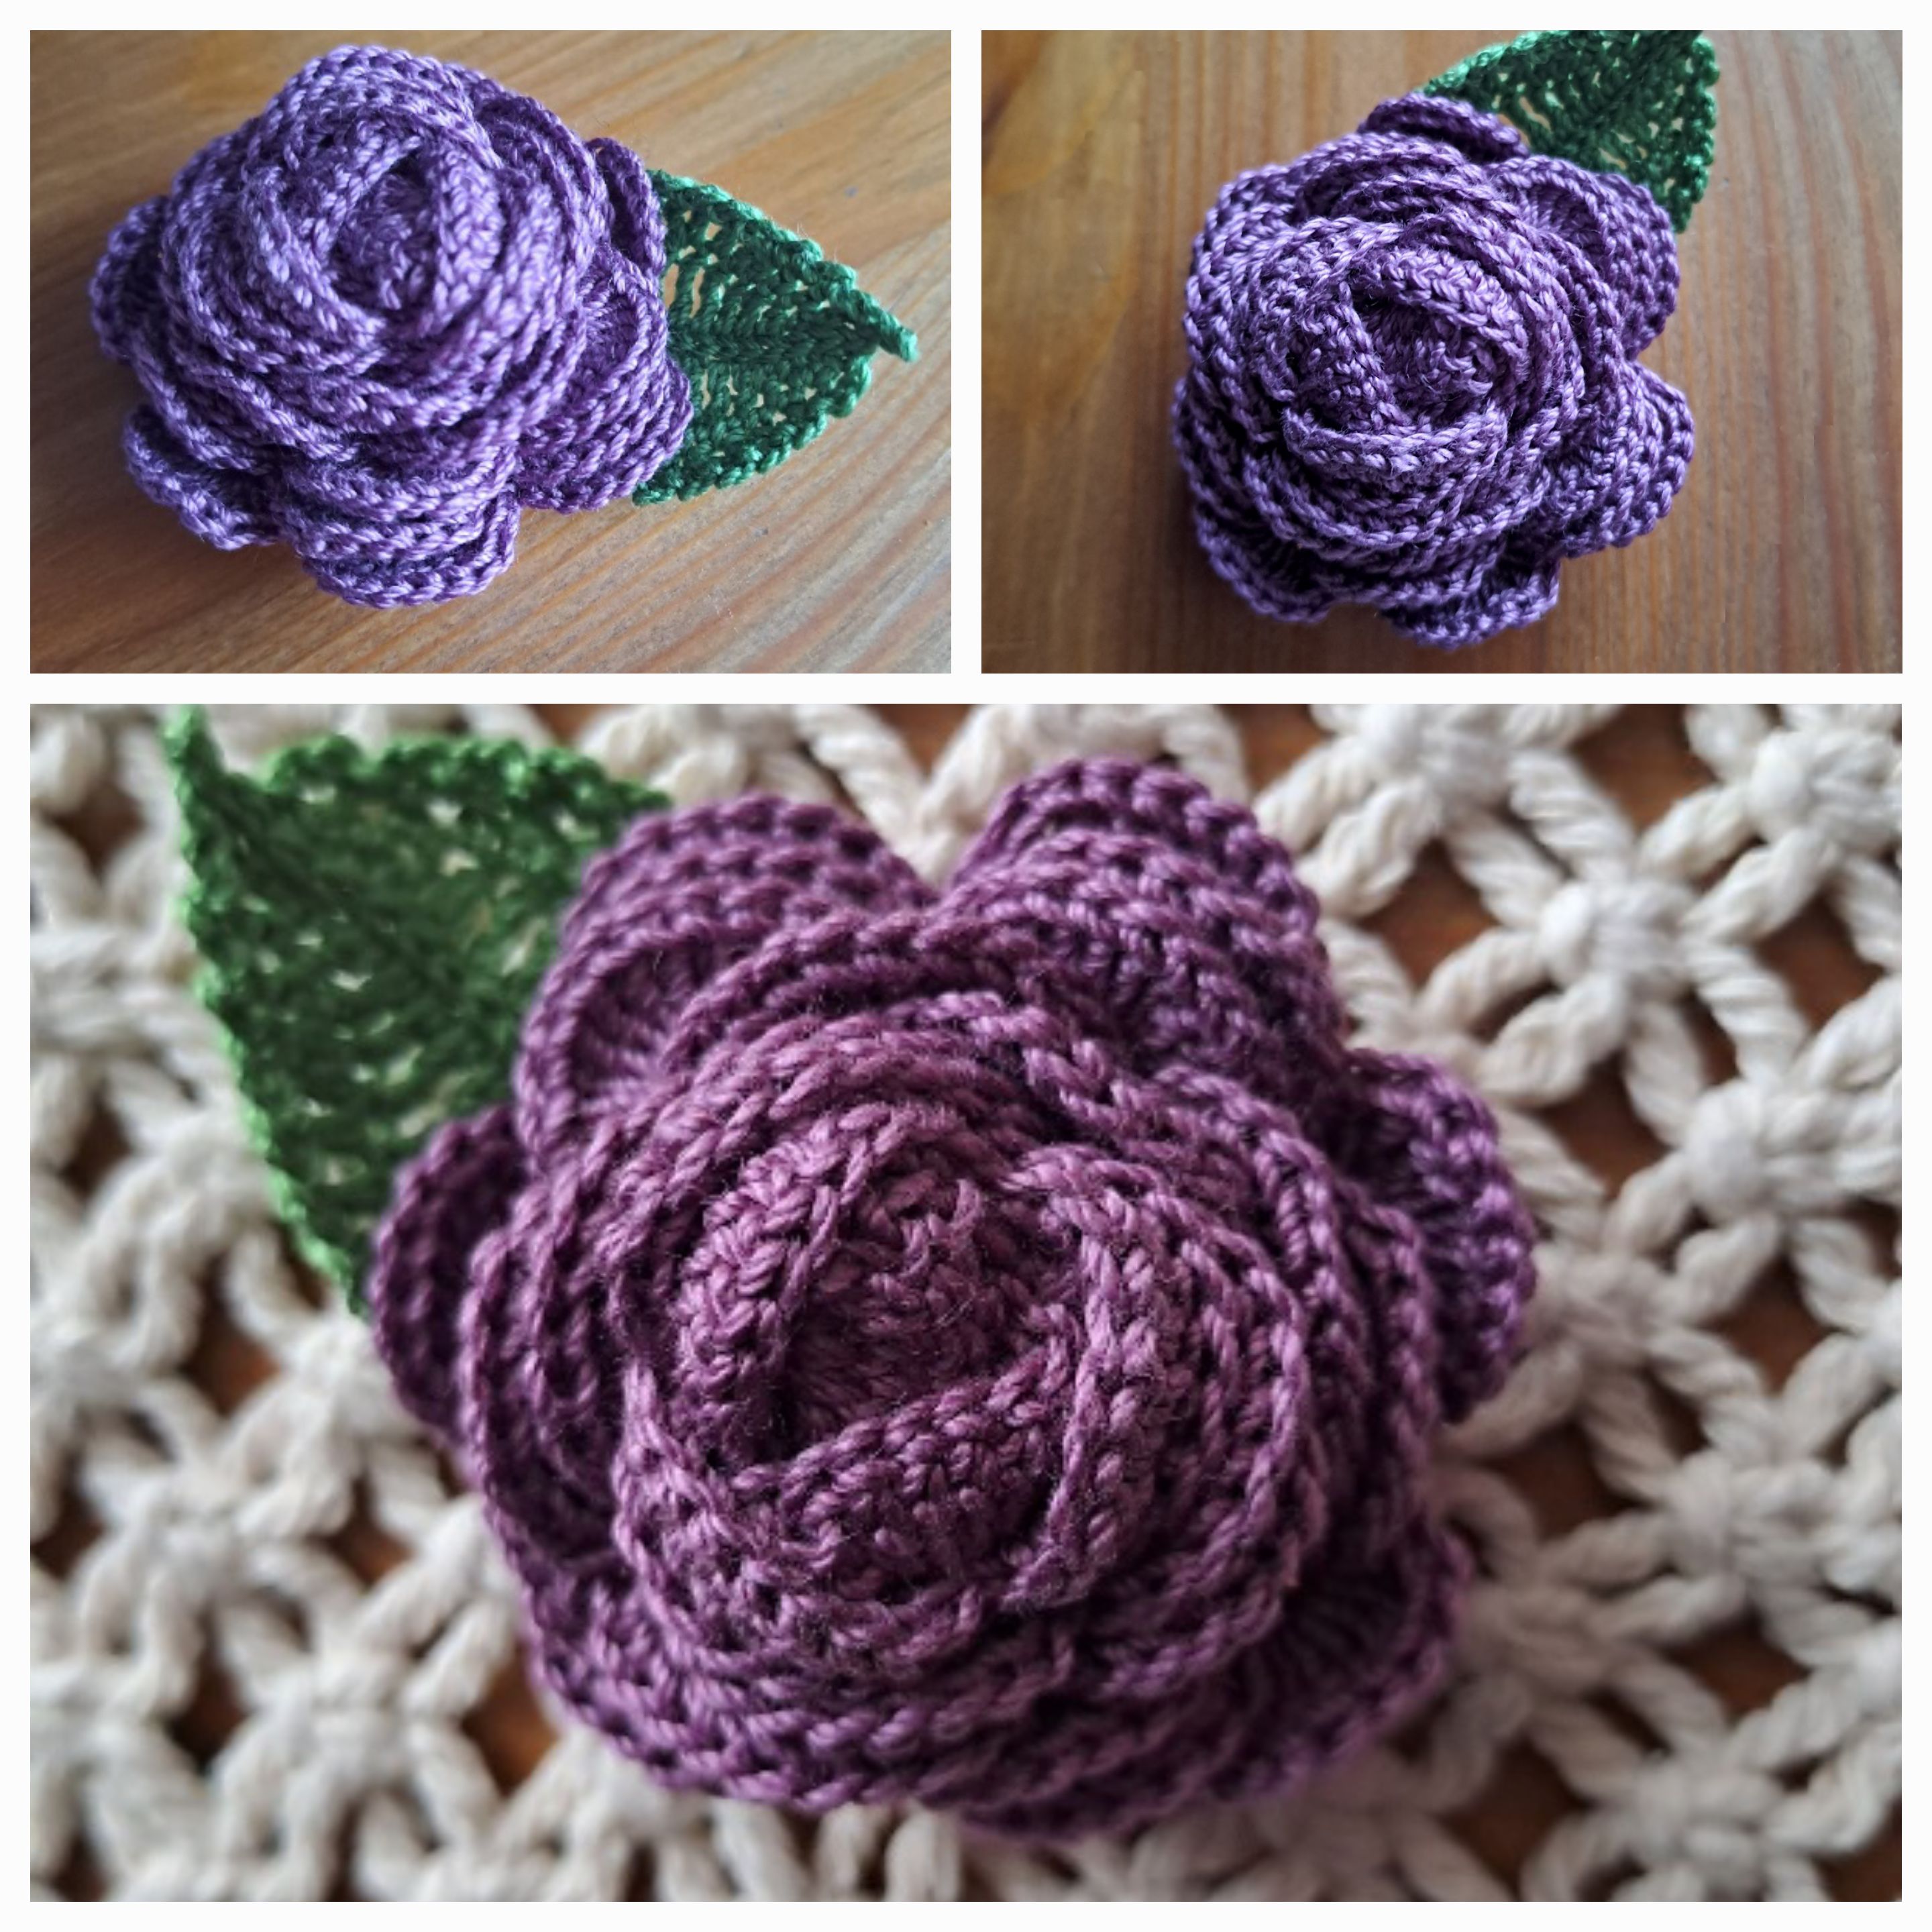 Photograph of three crochet roses that have the flower and a leaf.